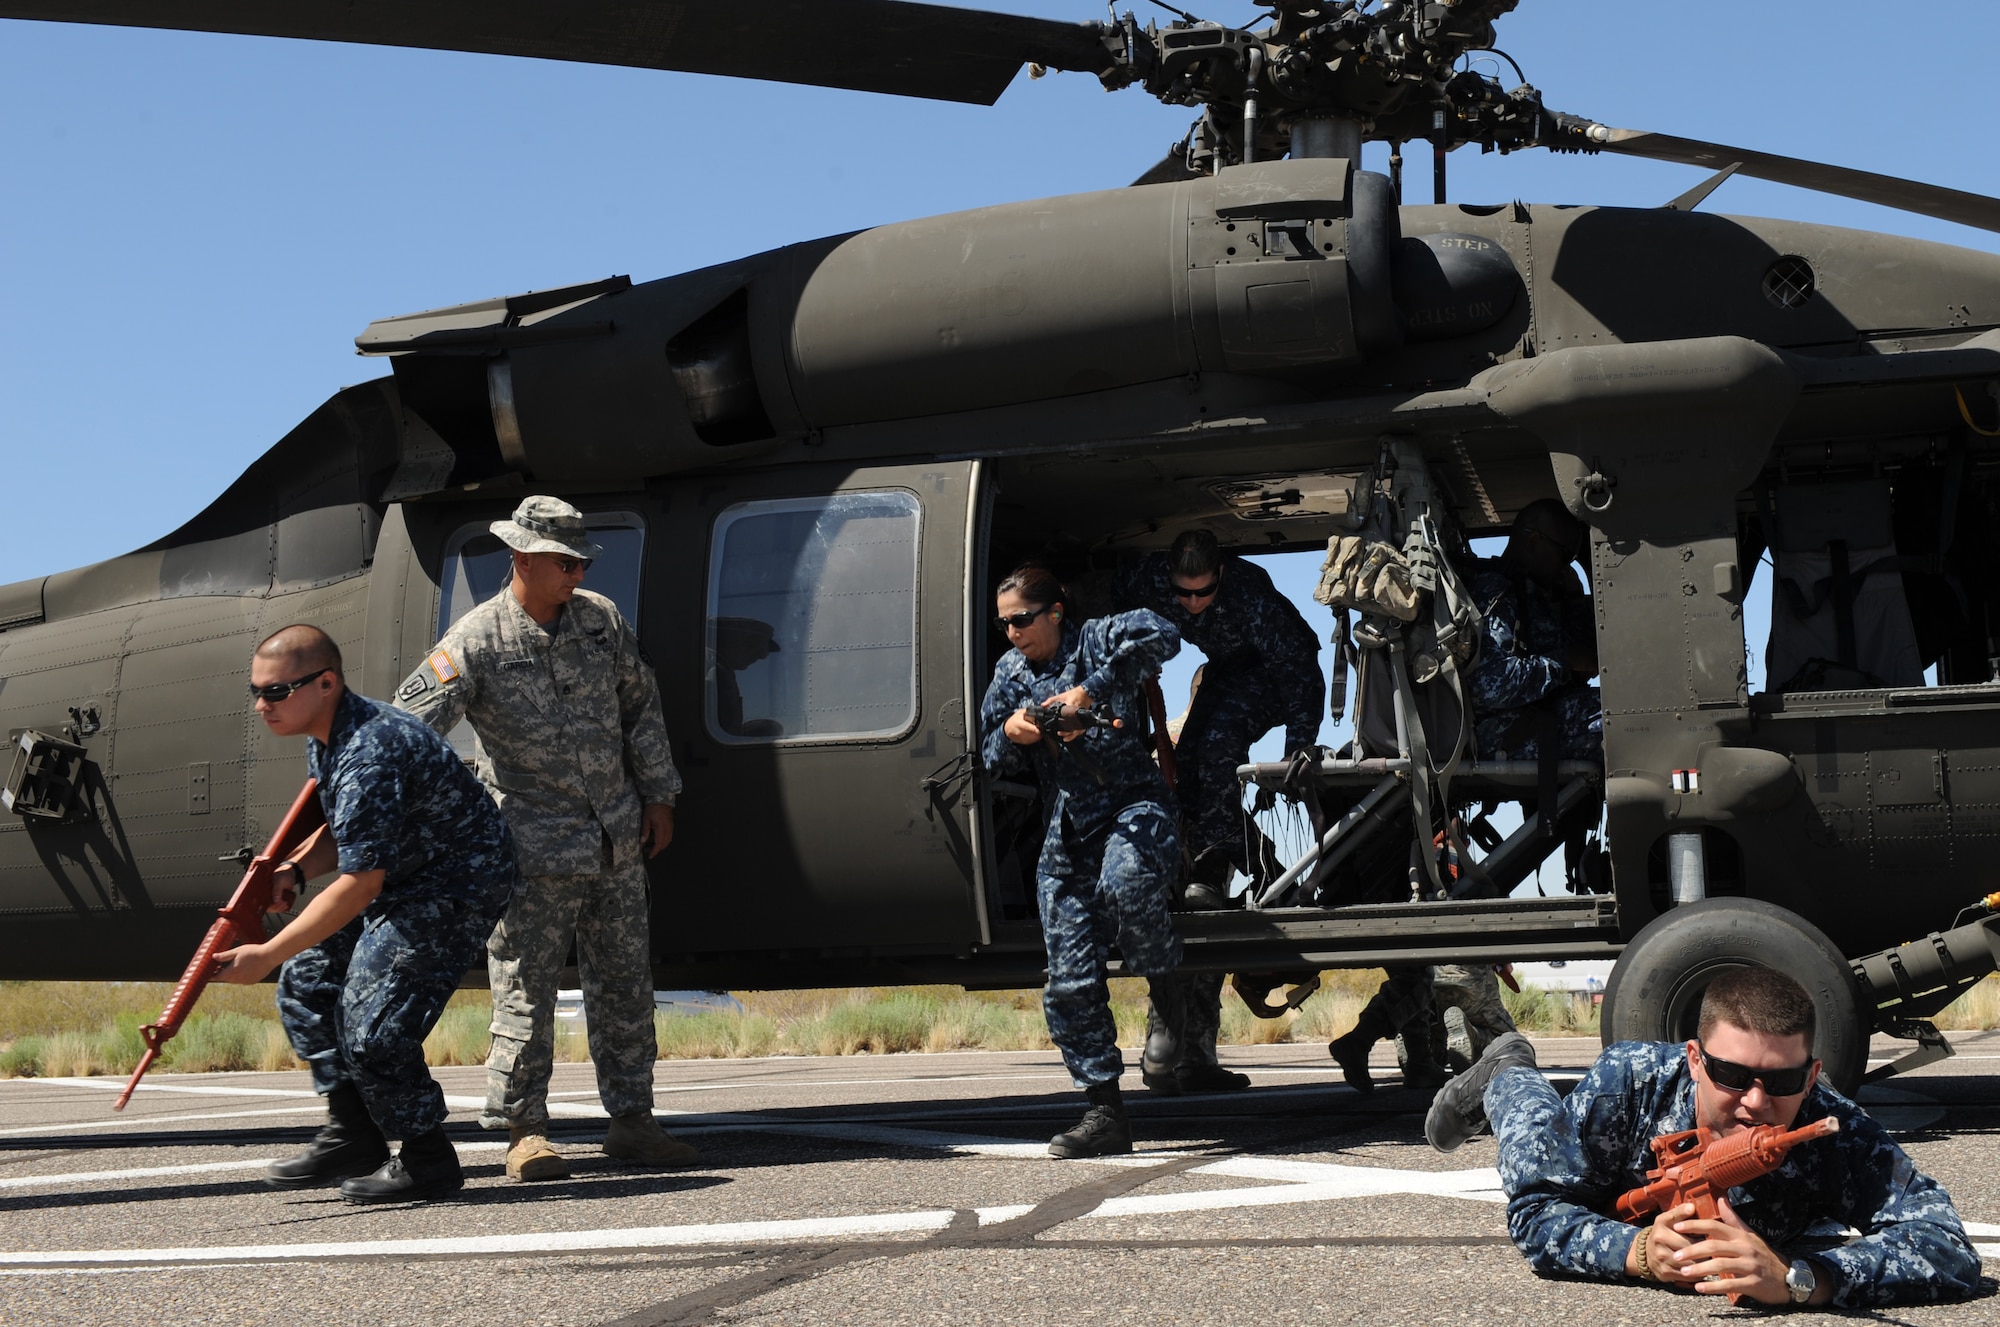 Members of the U.S. Navy learn how provide cover for a UH-60 Black Hawk during helicopter pre-deployment training at Davis-Monthan Air Force Base, Ariz. June 7. This training was to prepare Airmen, Marines, soldiers and sailors for actions they might experience in combat. (U.S. Air Force photo by Senior Airman Brittany Dowdle/released)